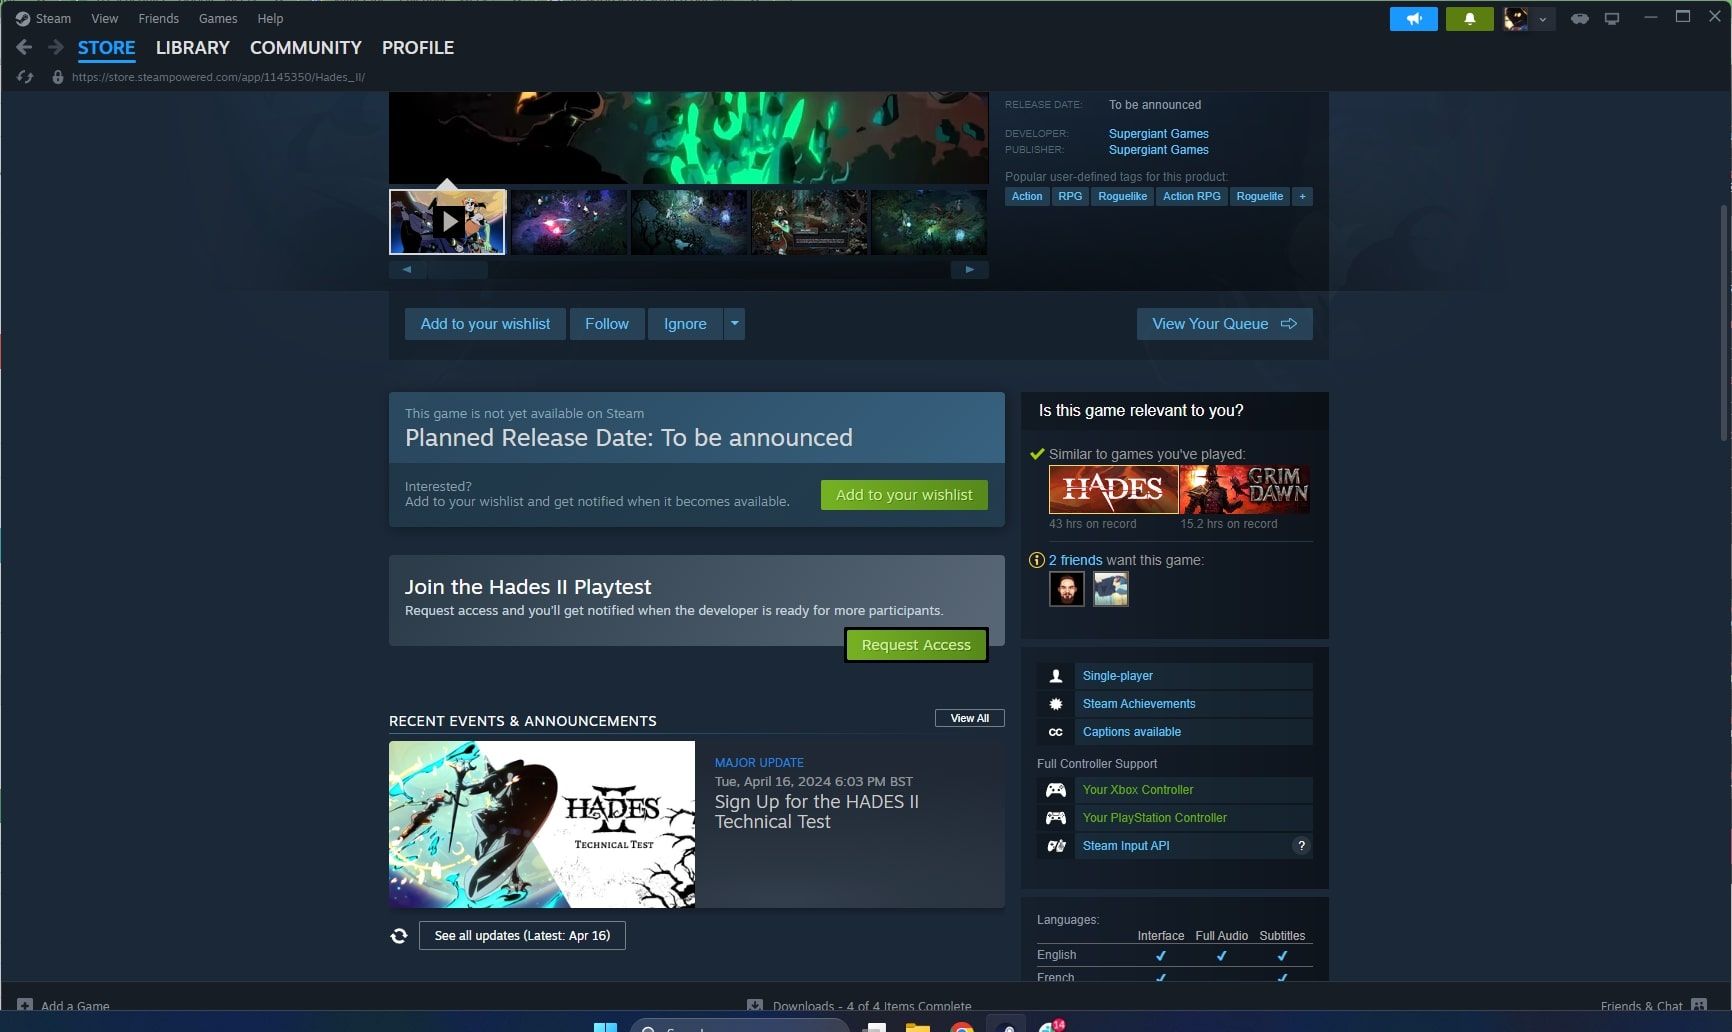 The Hades 2 Steam Page with the Technical Test button